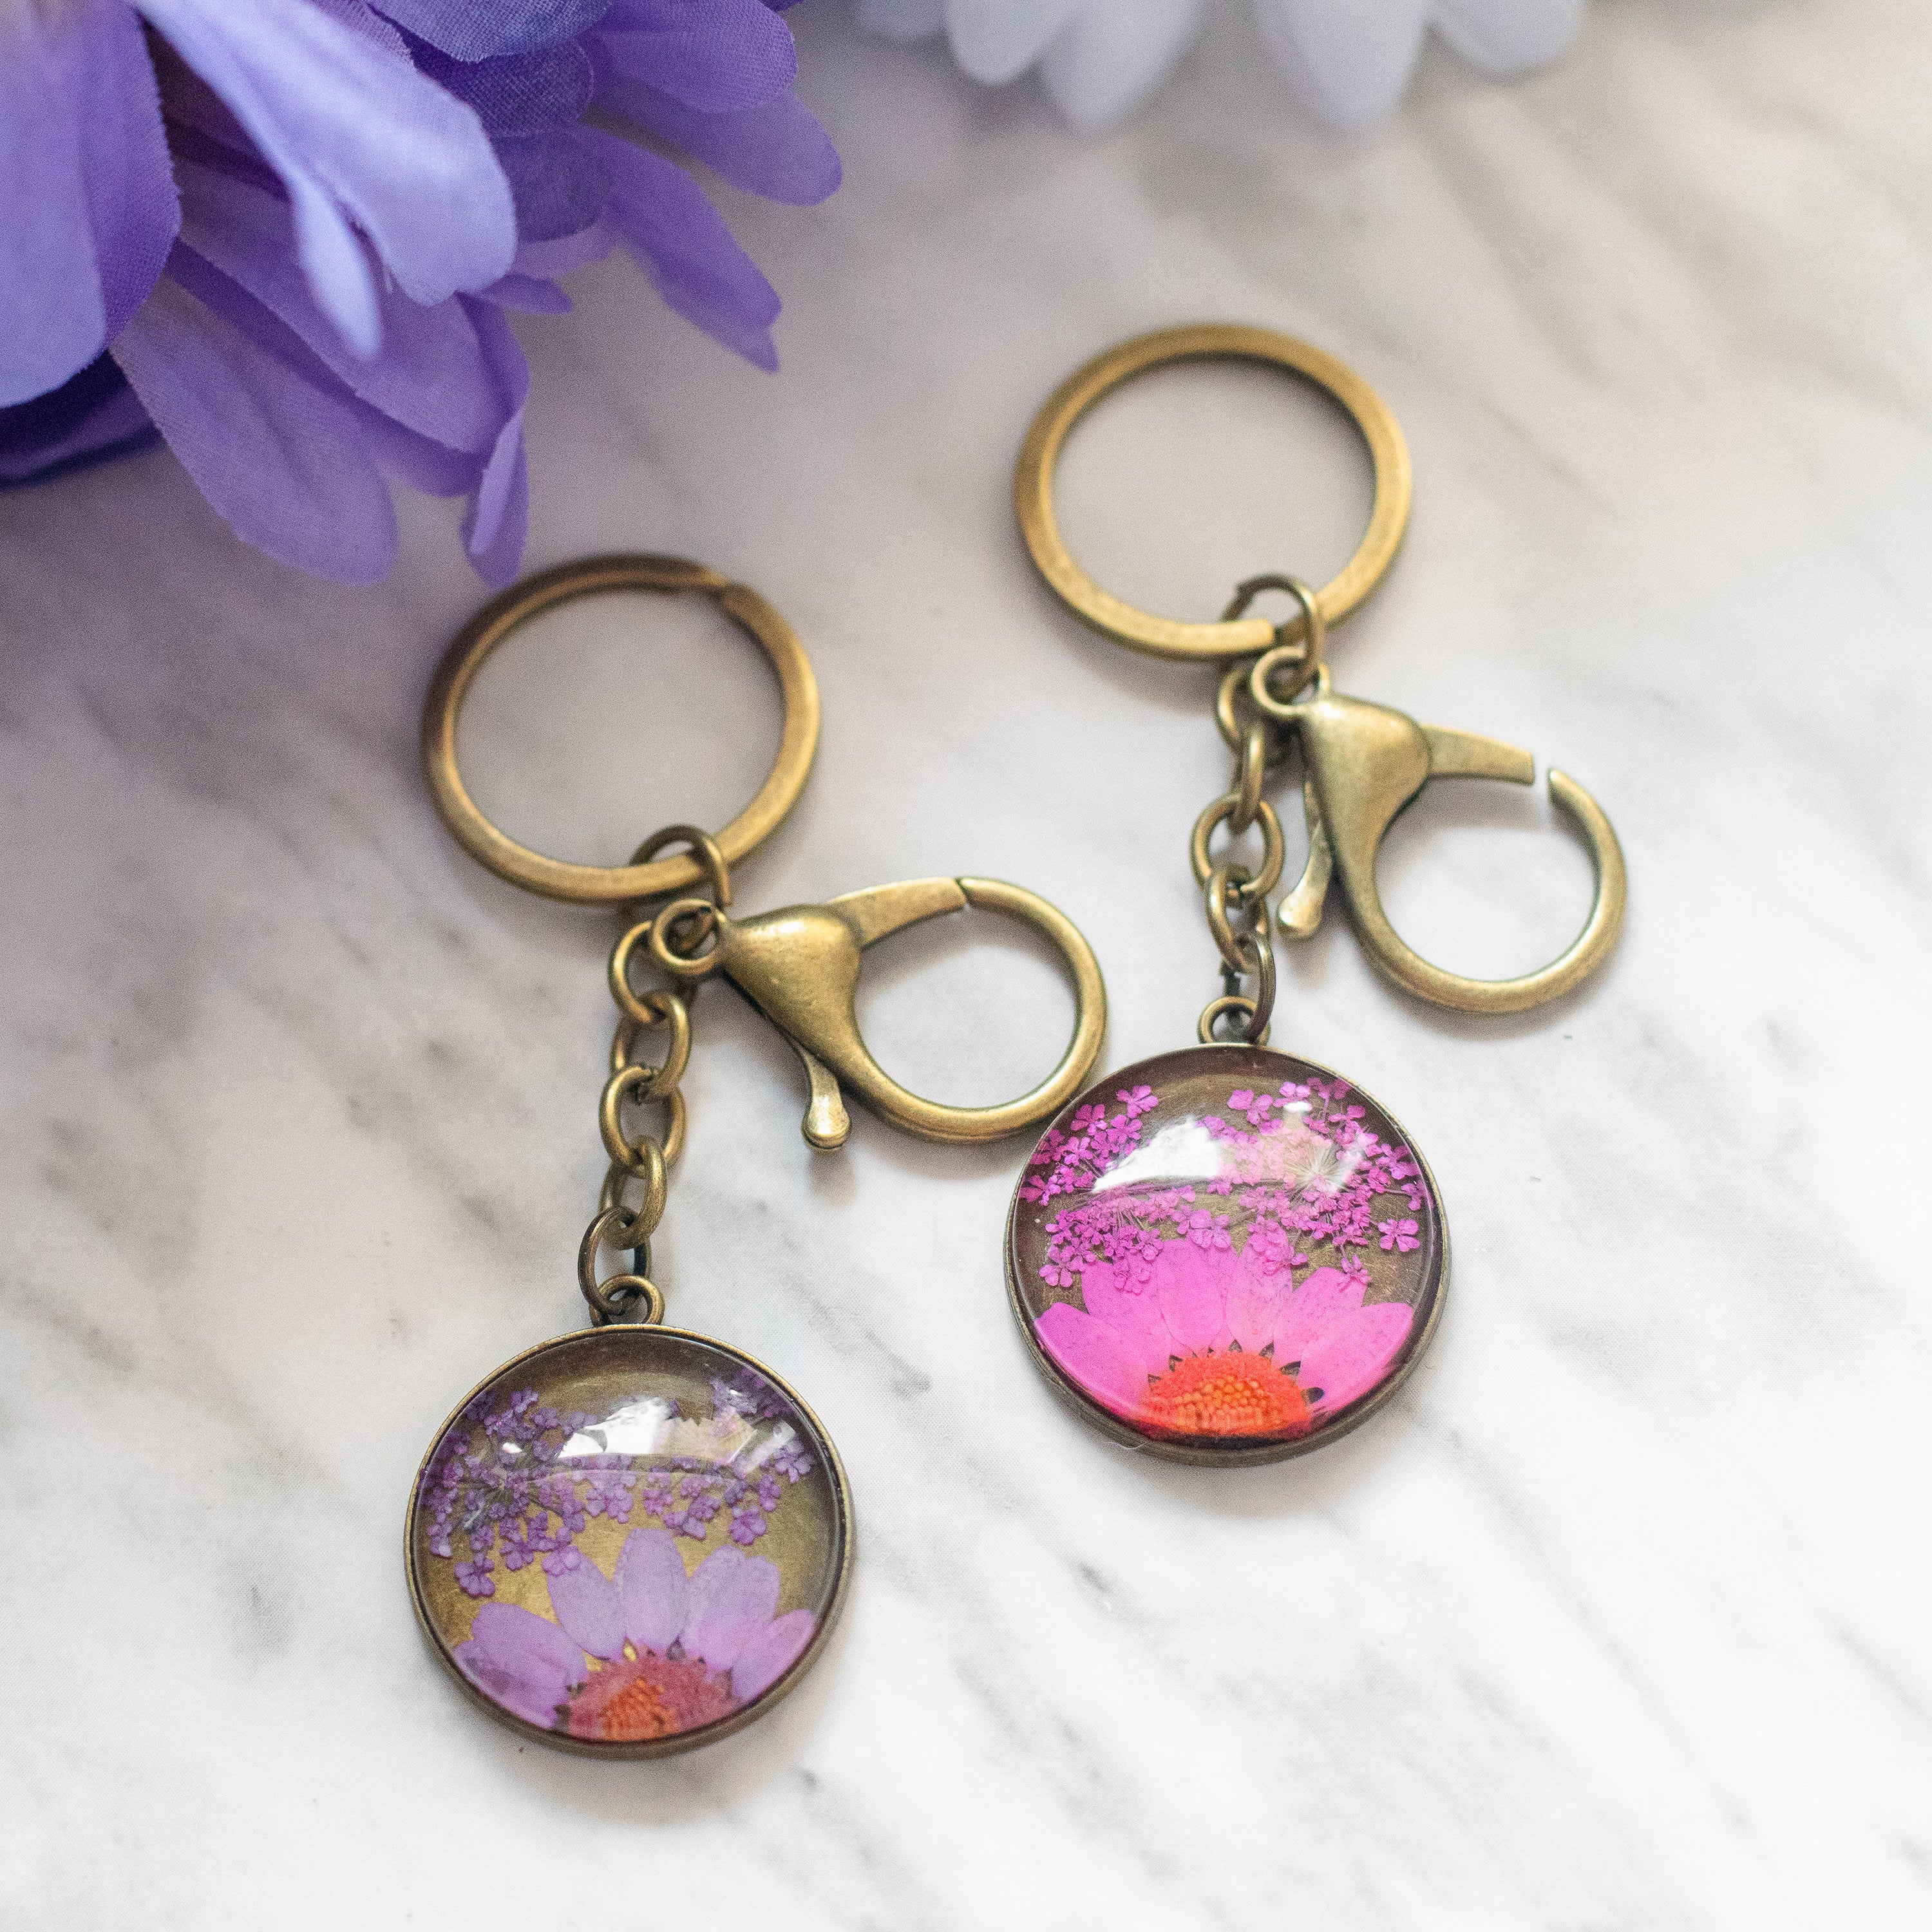 Real Pressed Flower Resin Keychain with Daisy and Lace Floral Neverland Floralfy 09